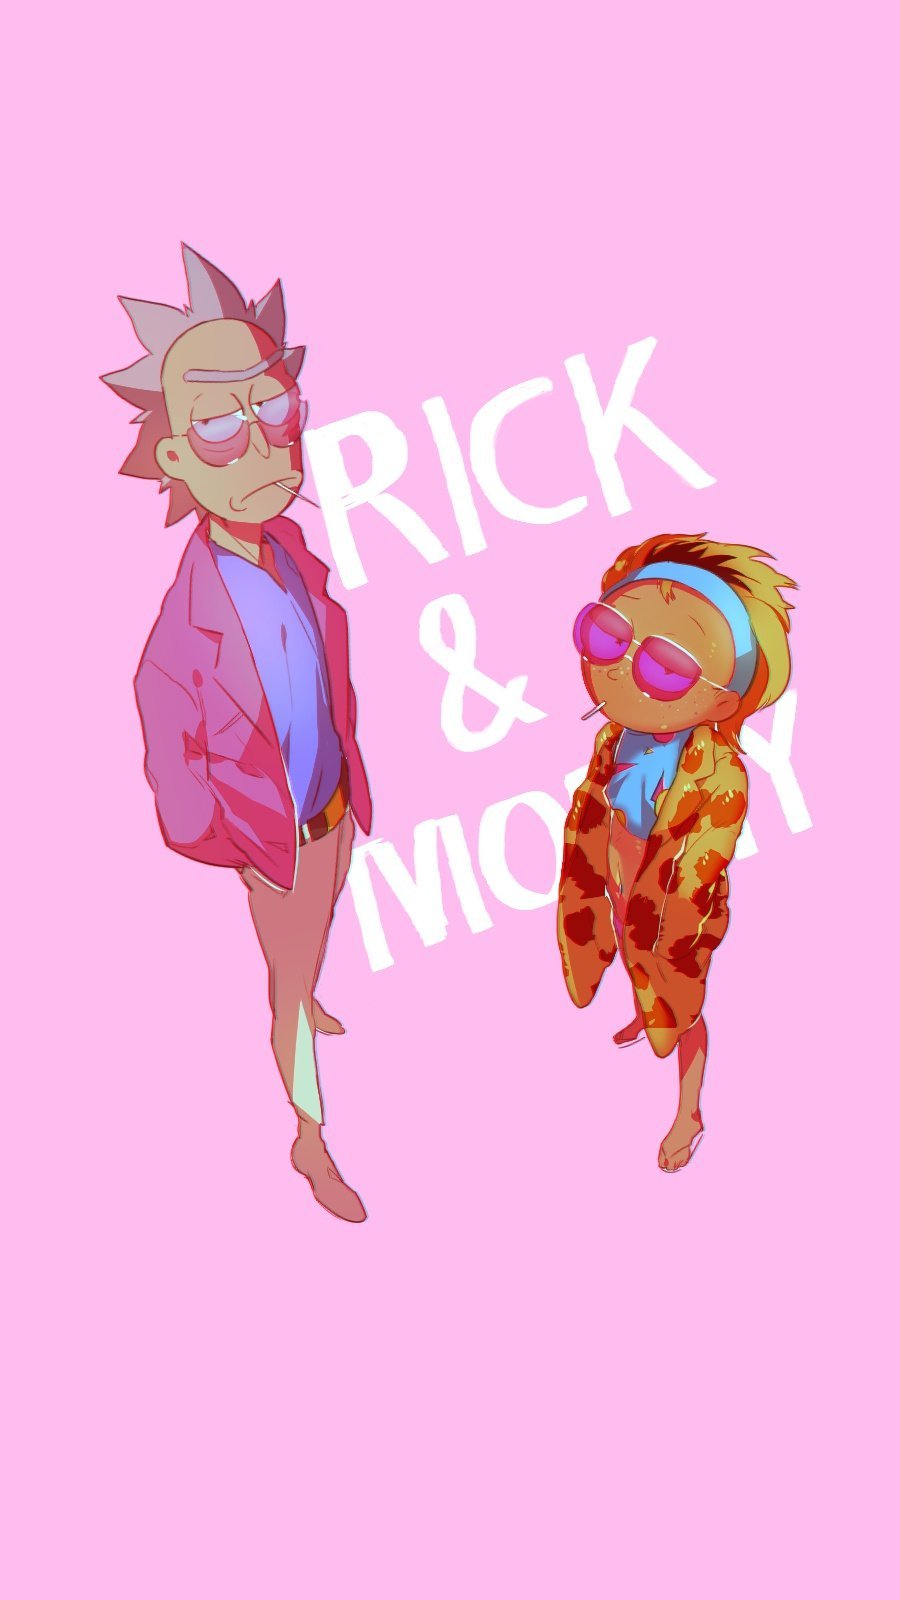 Wallpaper Morty Smith and Rick Sanchez Vertical